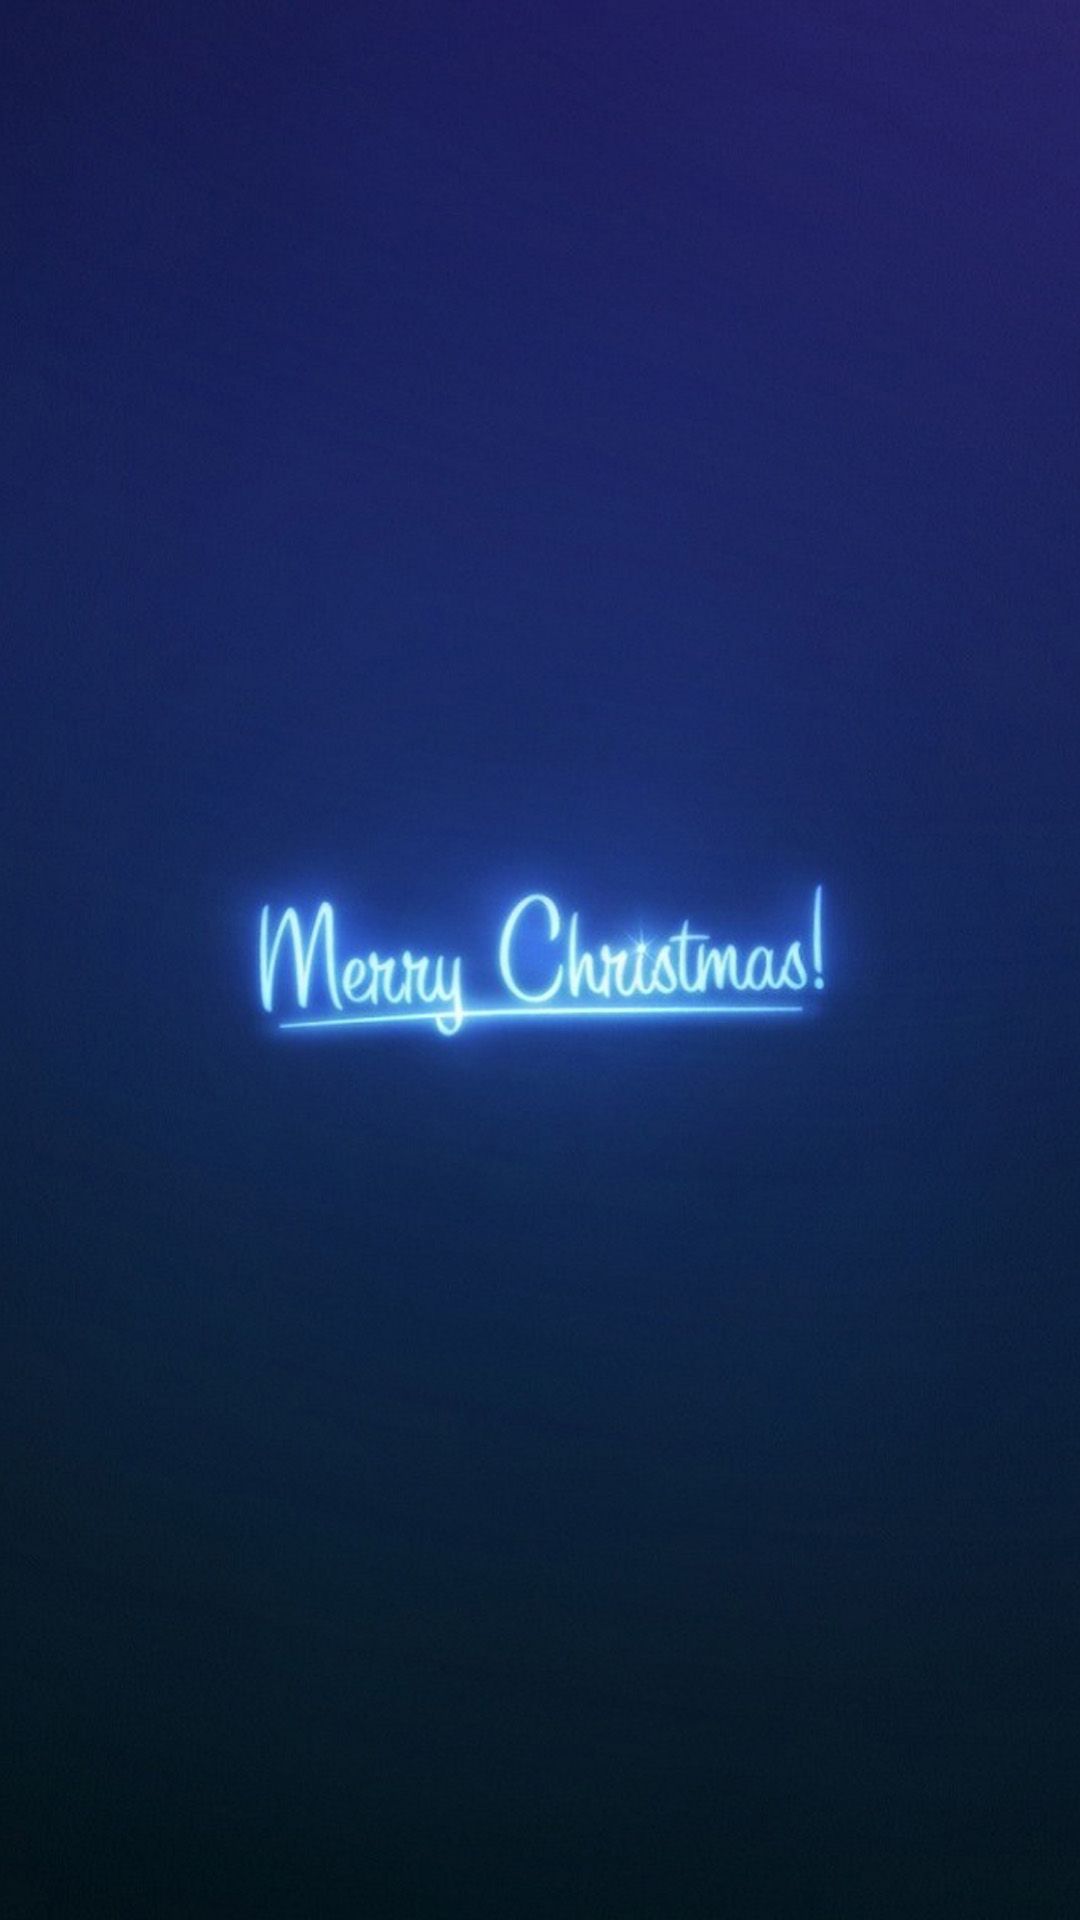 1080x1920 Merry Christmas Neon Blue Light Android Wallpaper Free Download